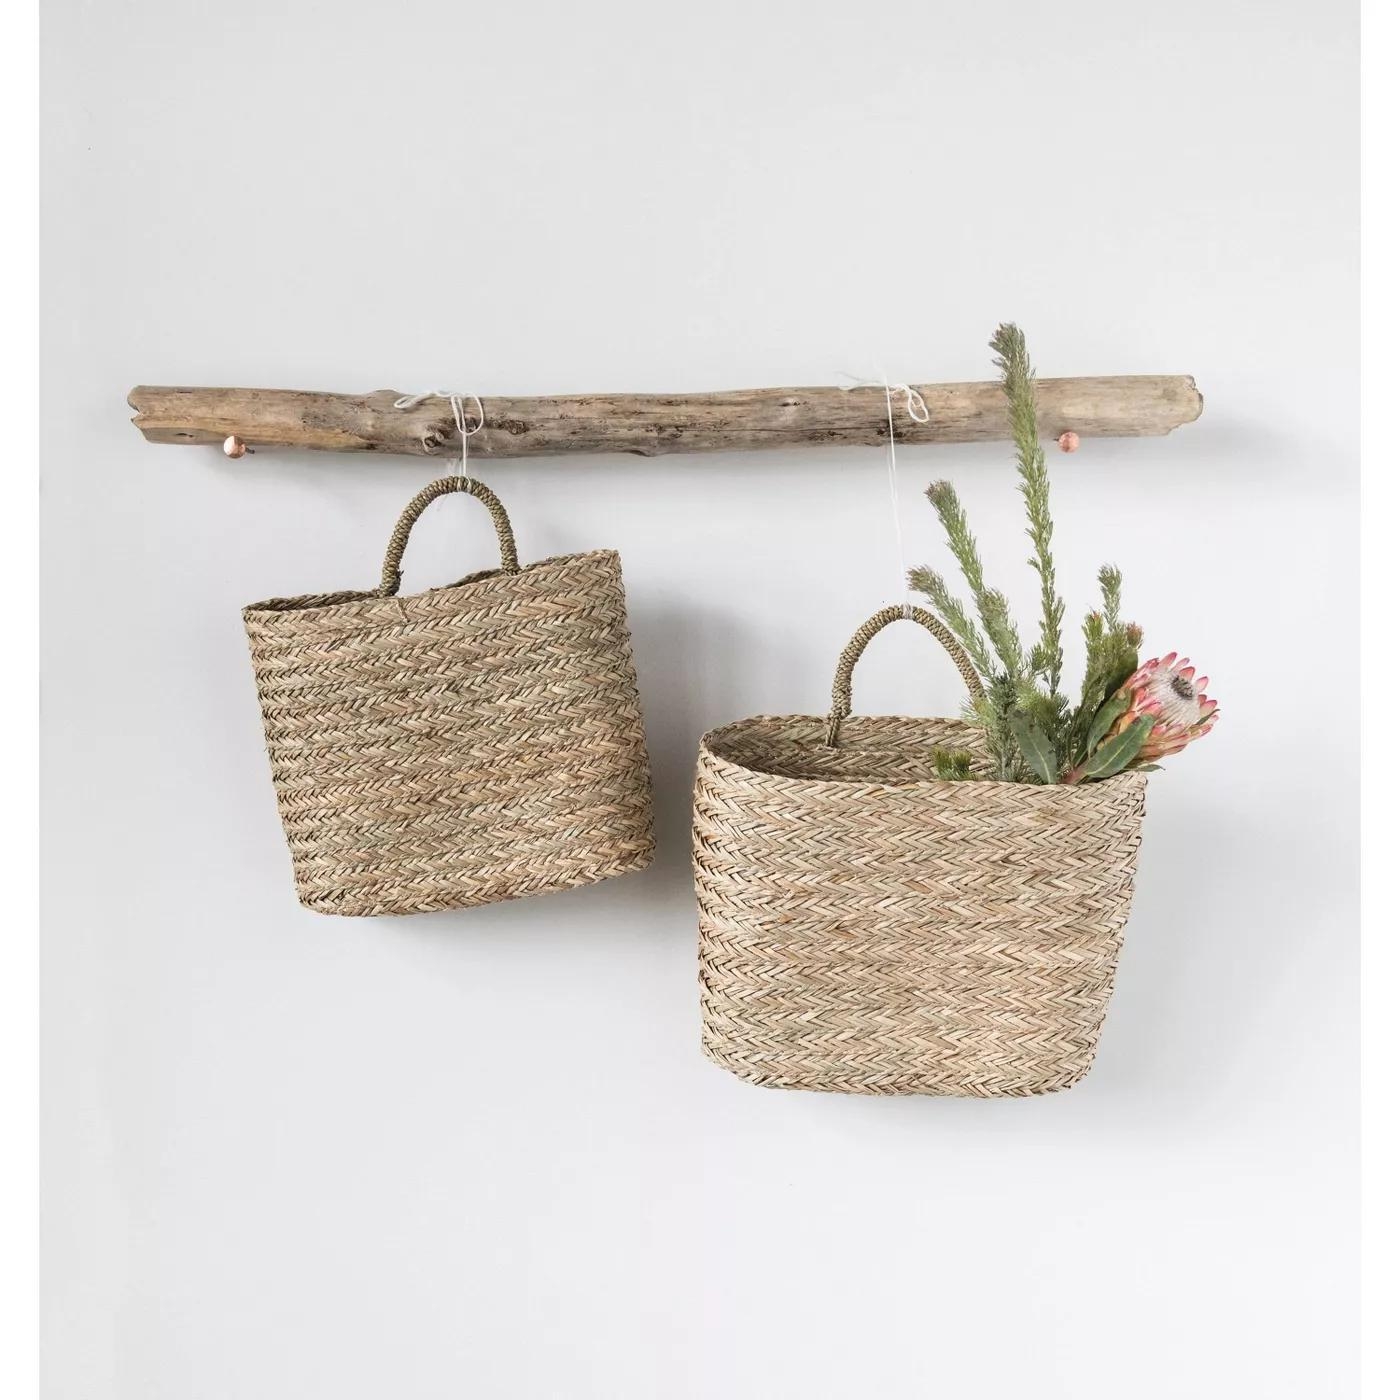 Handwoven Beige Seagrass Wall Baskets (Set of 2 Sizes) - Image 5